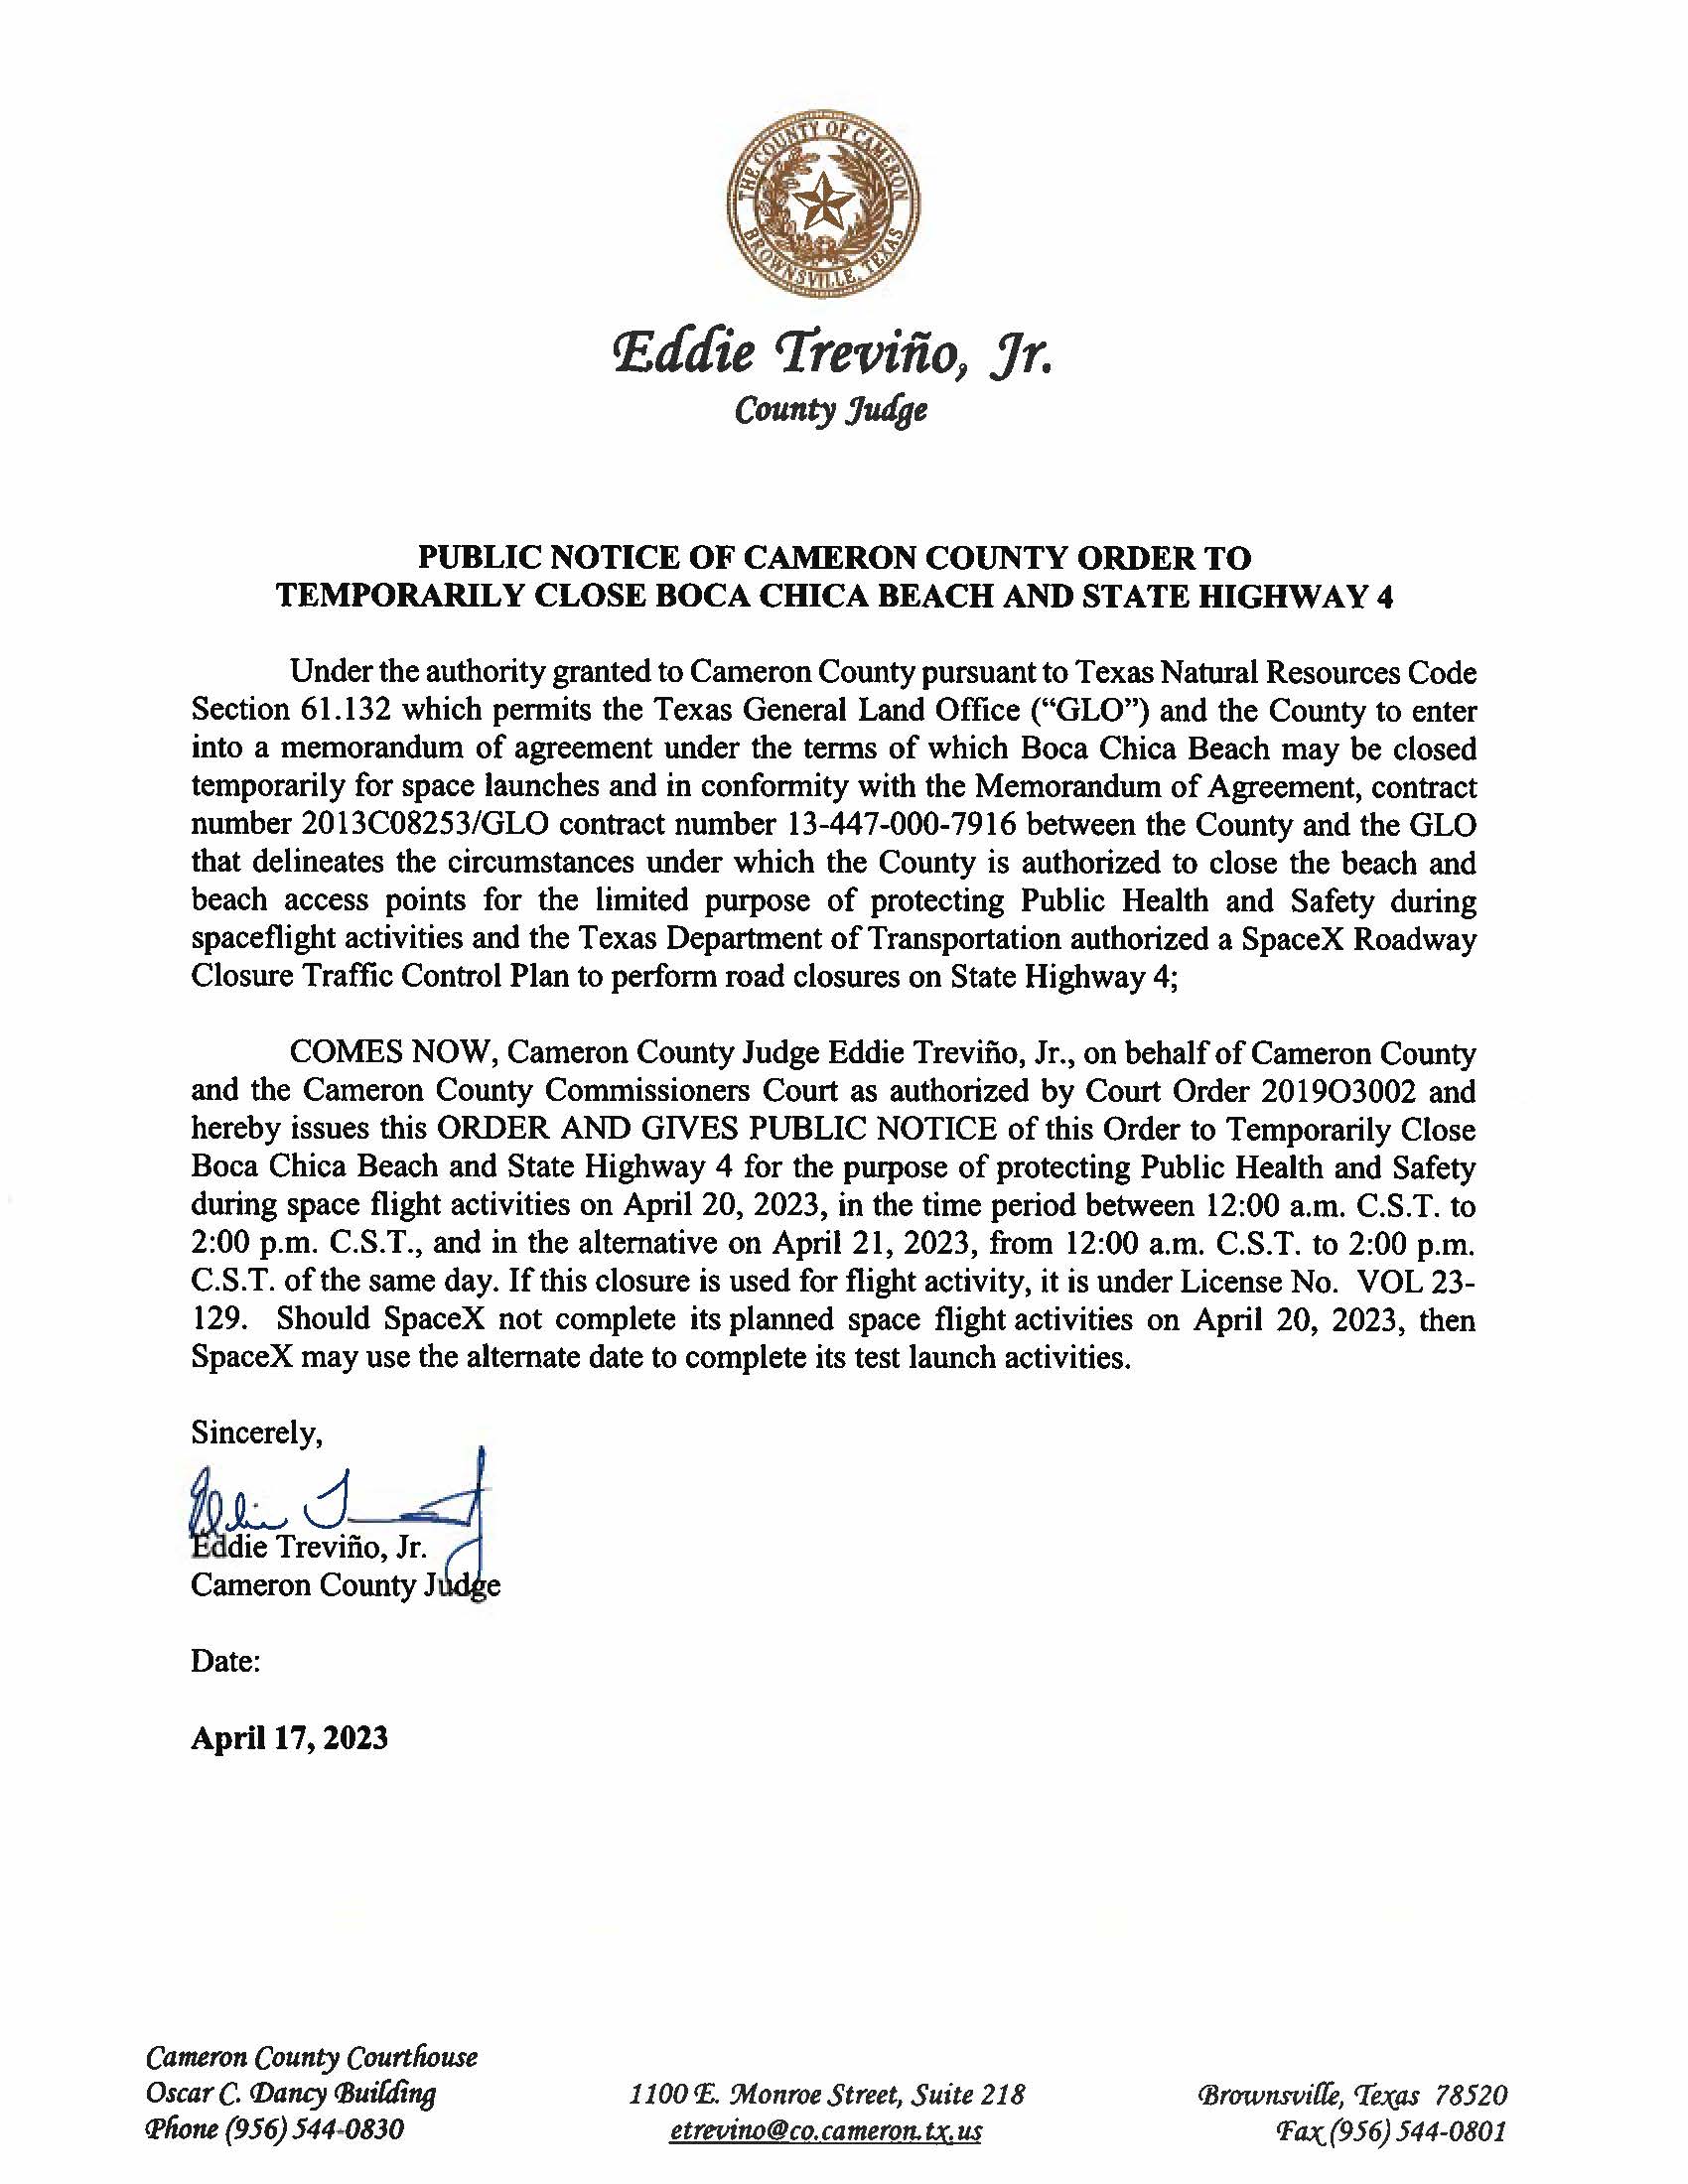 PUBLIC NOTICE OF CAMERON COUNTY ORDER TO TEMP. BEACH CLOSURE AND HWY.04.20.2023